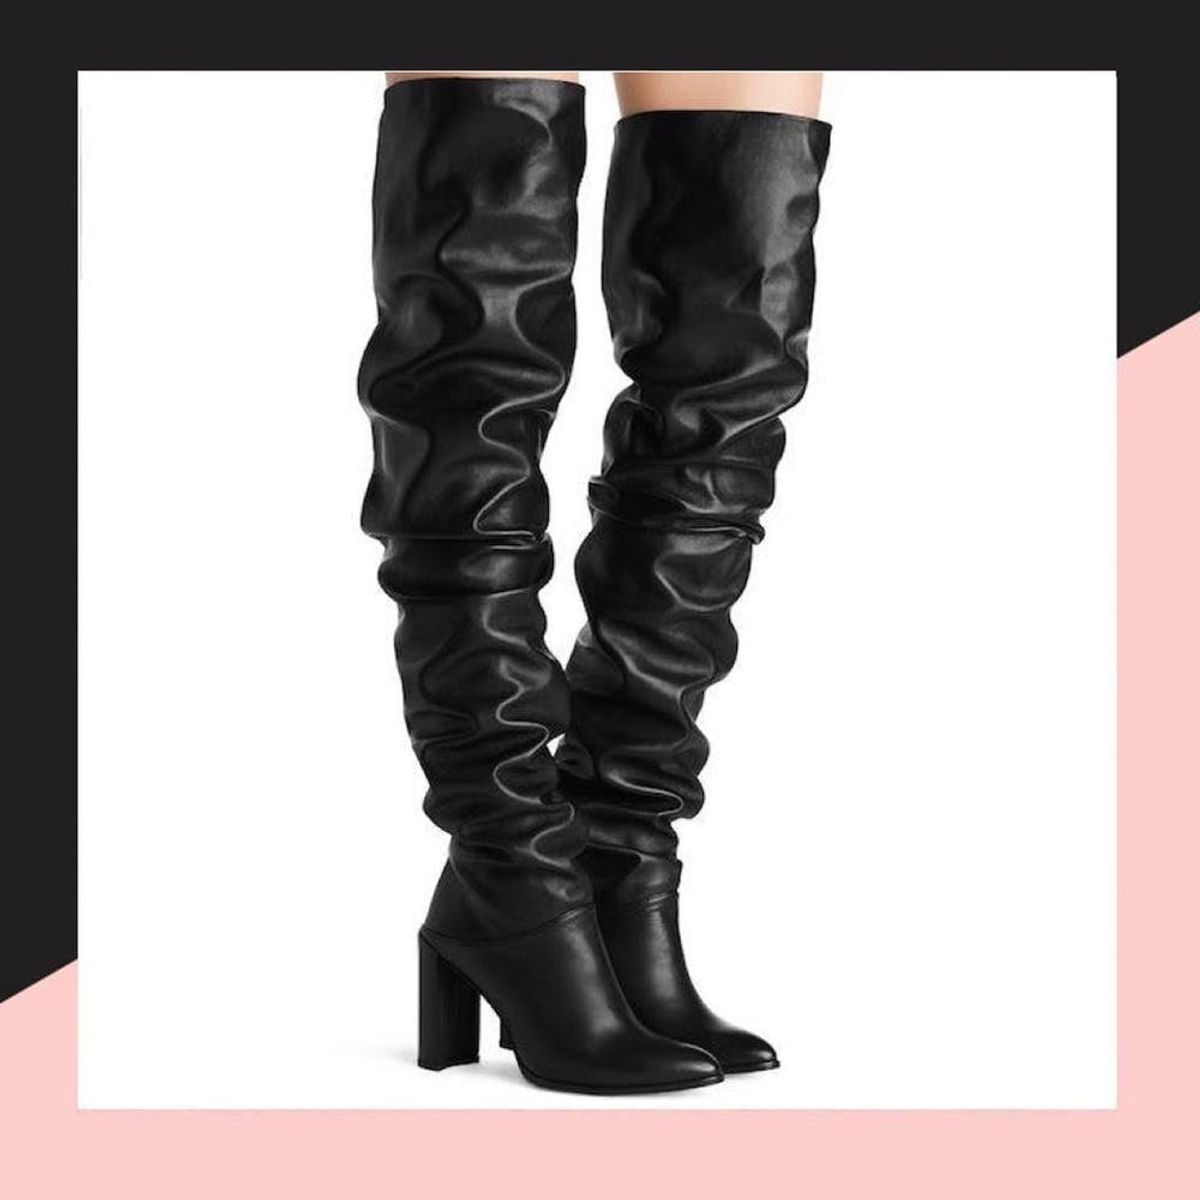 6 Slouch Boots That Will Be Big for Fall